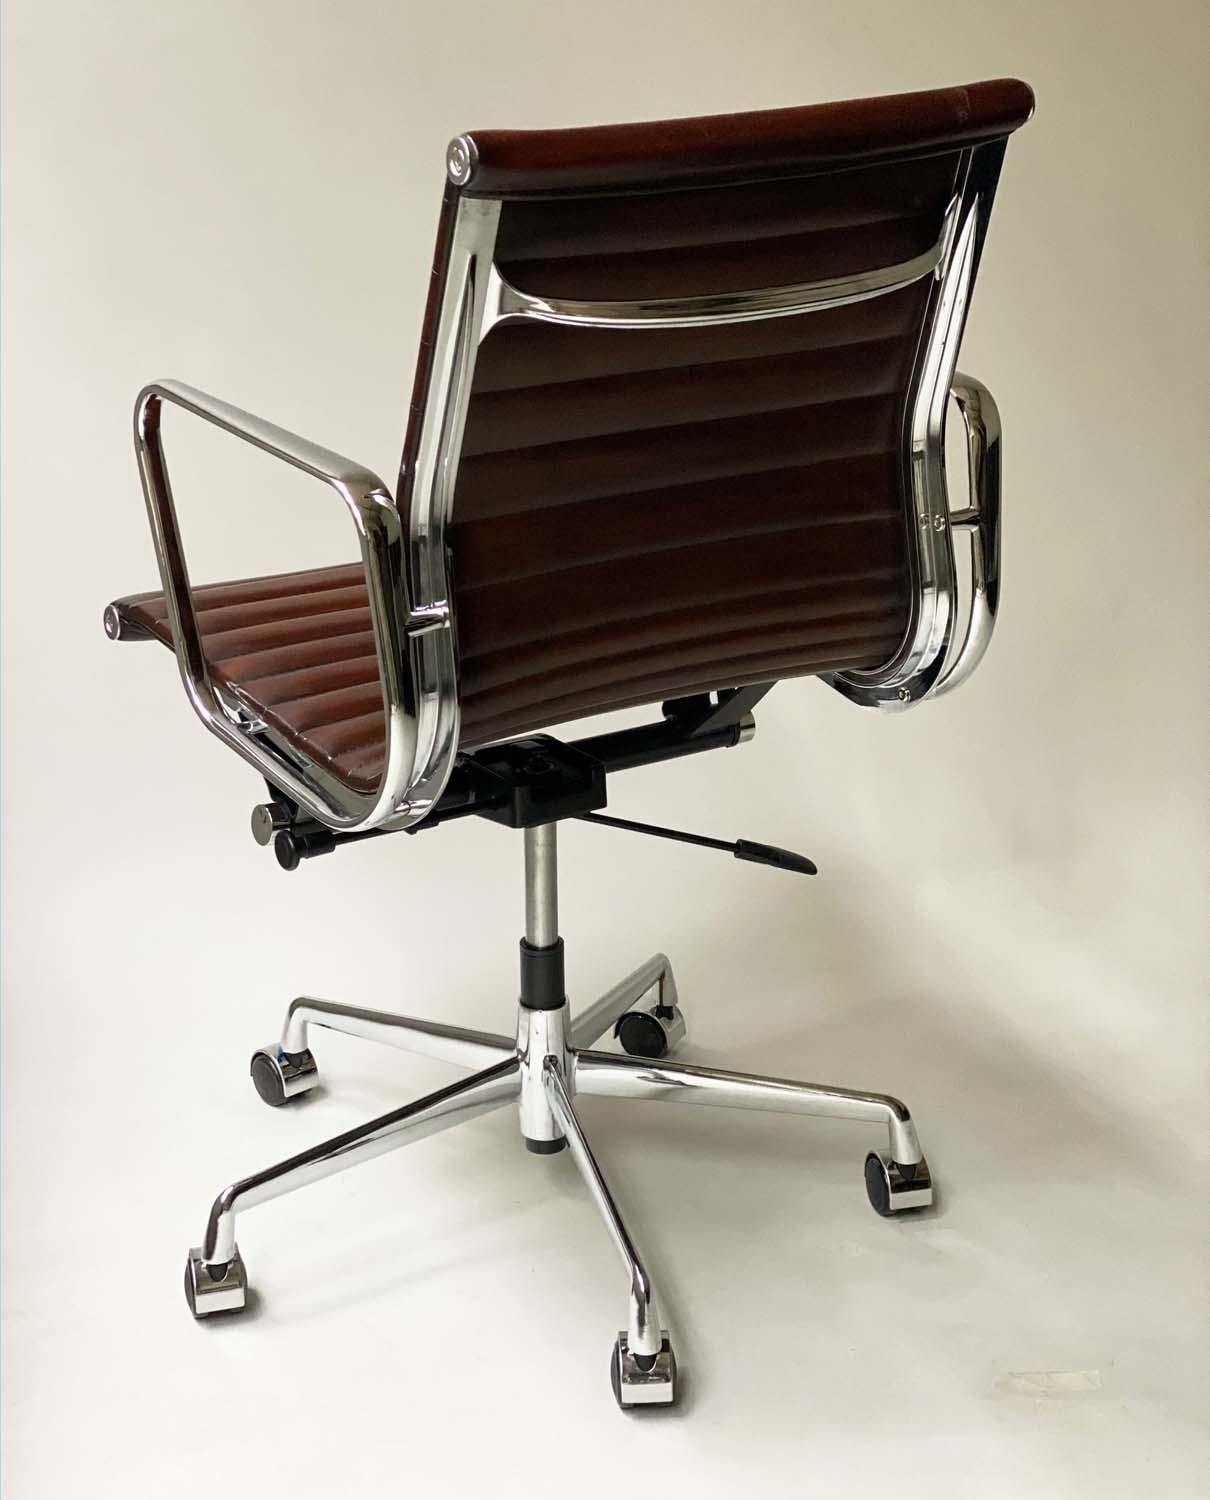 REVOLVING DESK CHAIR, Charles and Ray Eames inspired with ribbed tan leather seat revolving and - Image 5 of 6